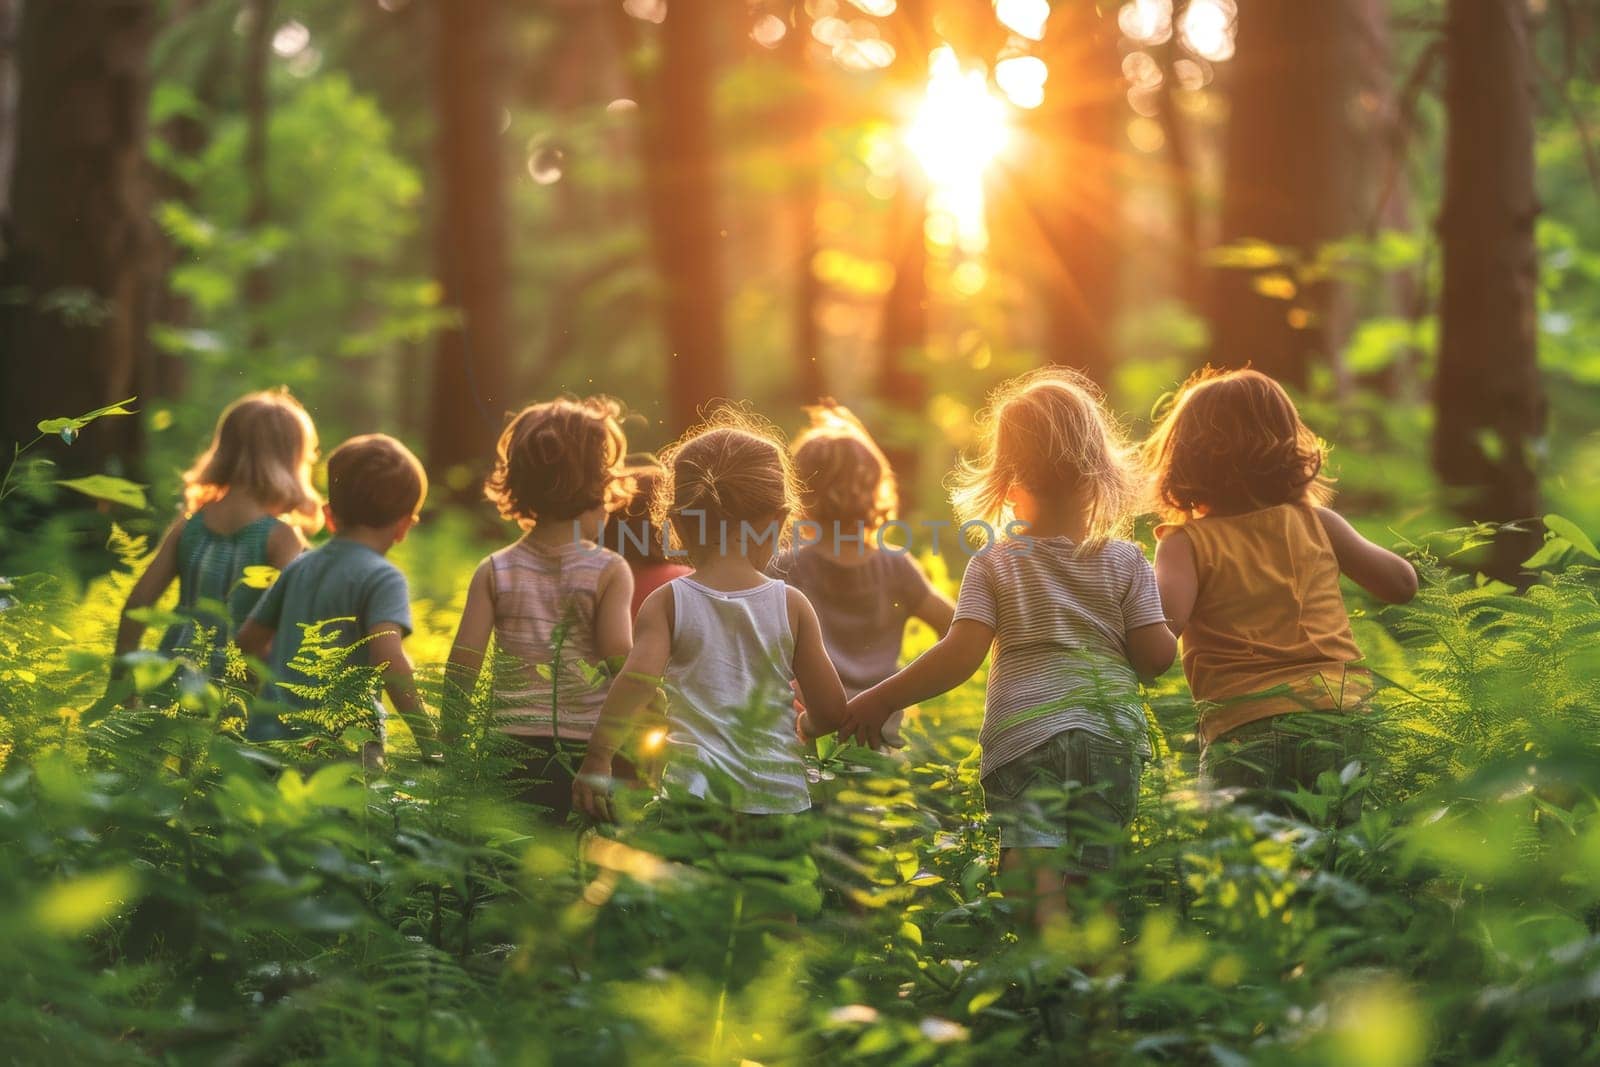 Group of Children Exploring Nature Together in Forest at Sunset